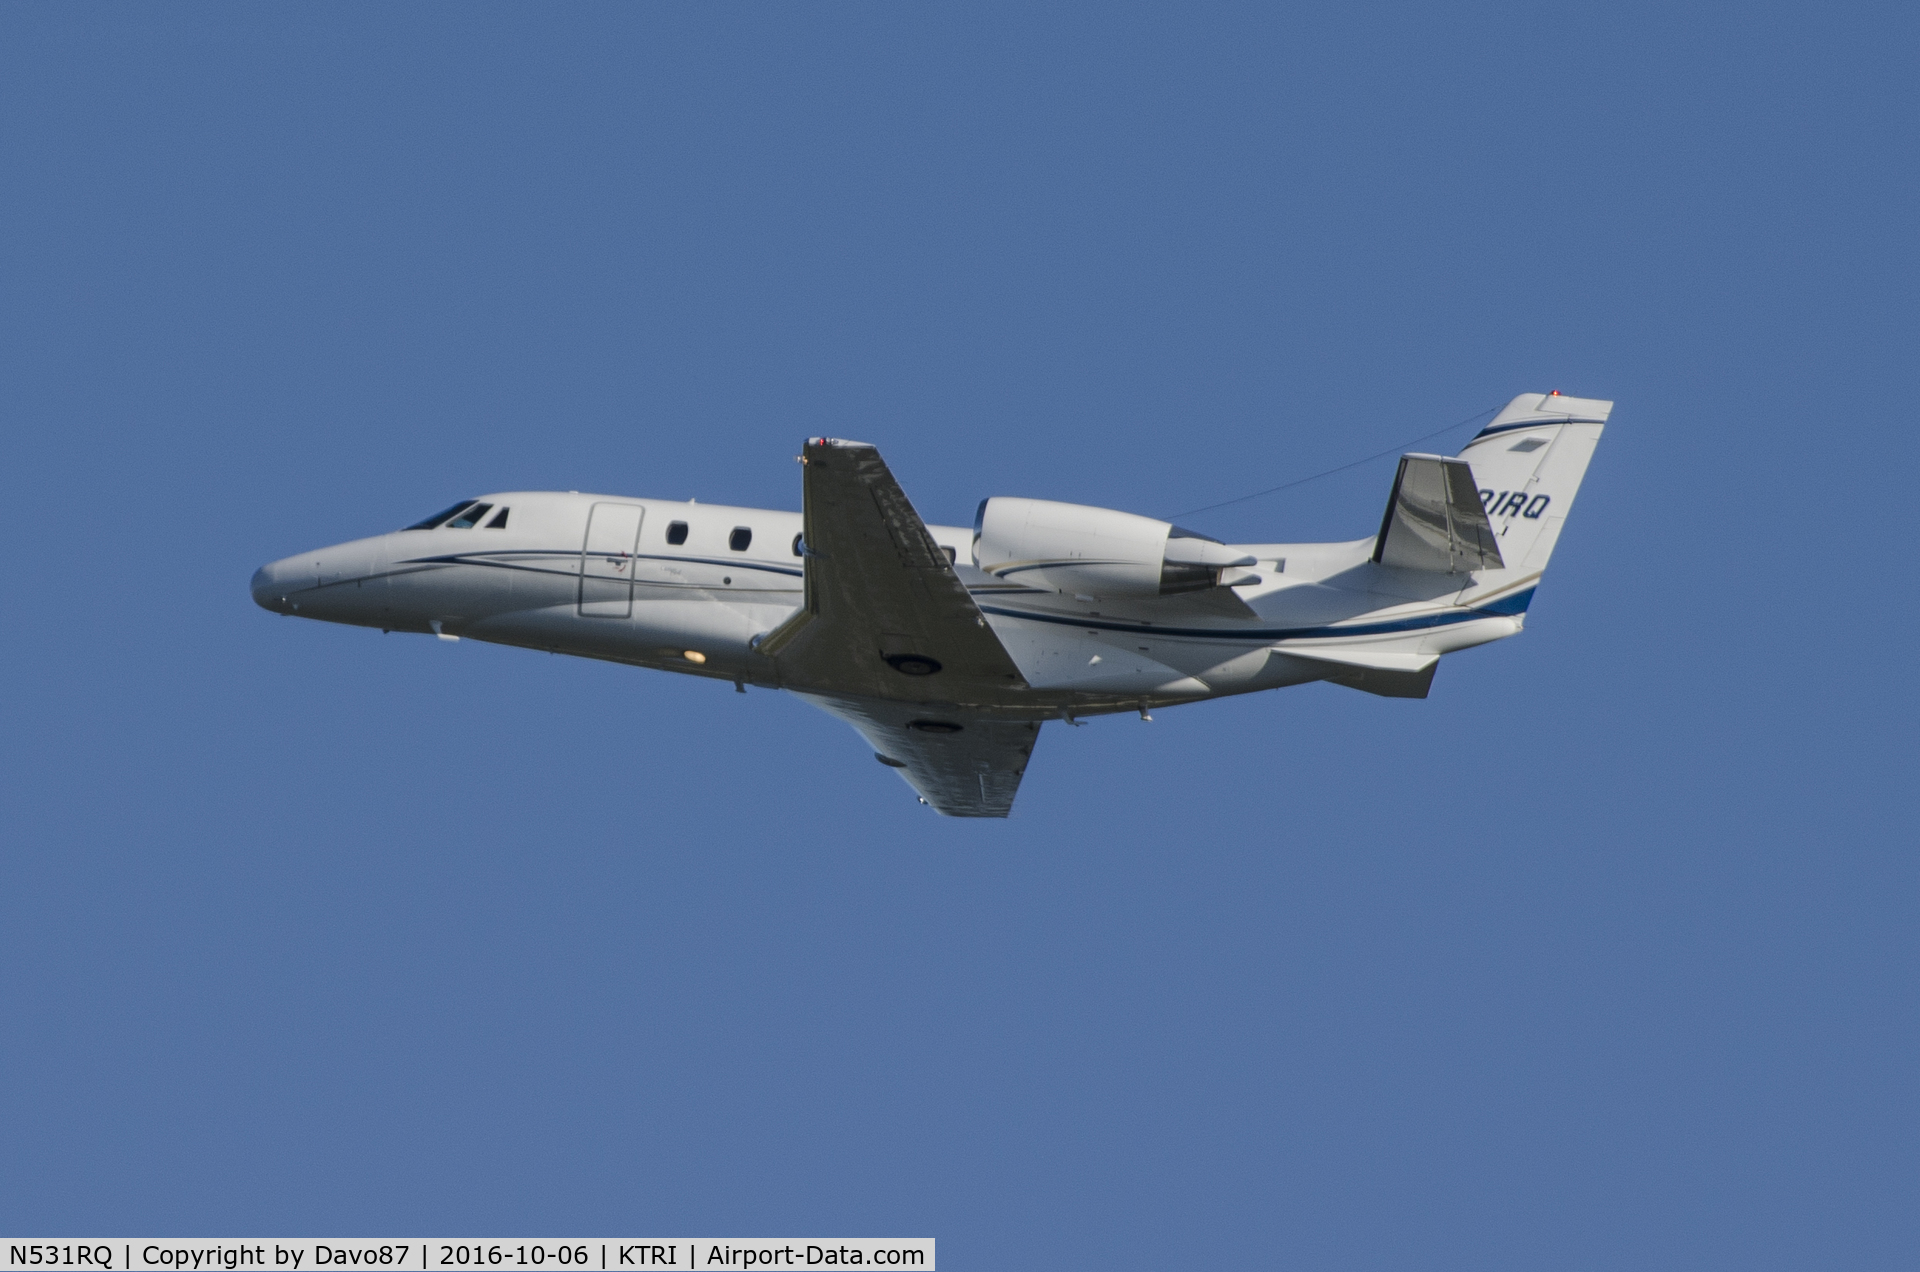 N531RQ, 2001 Cessna 560XL Citation Excel C/N 560-5184, Lifting off from Tri-Cities Airport (KTRI) in the late afternoon sun.